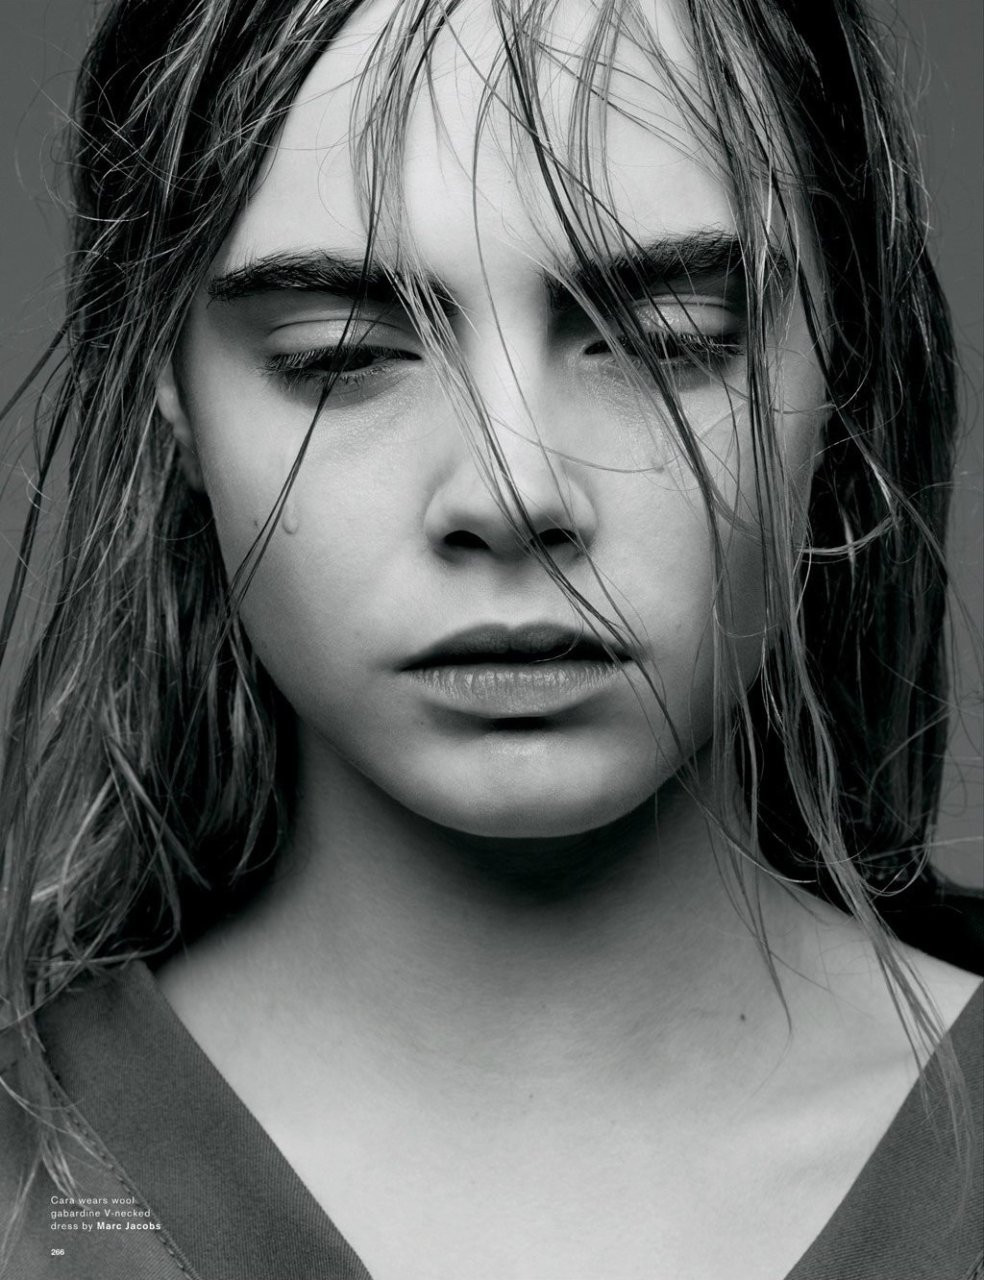 Cara-Delevingne-Kendall-Jenner-in-Love-Magazine-05---TheFappening.nu8e600ce995965374.jpg